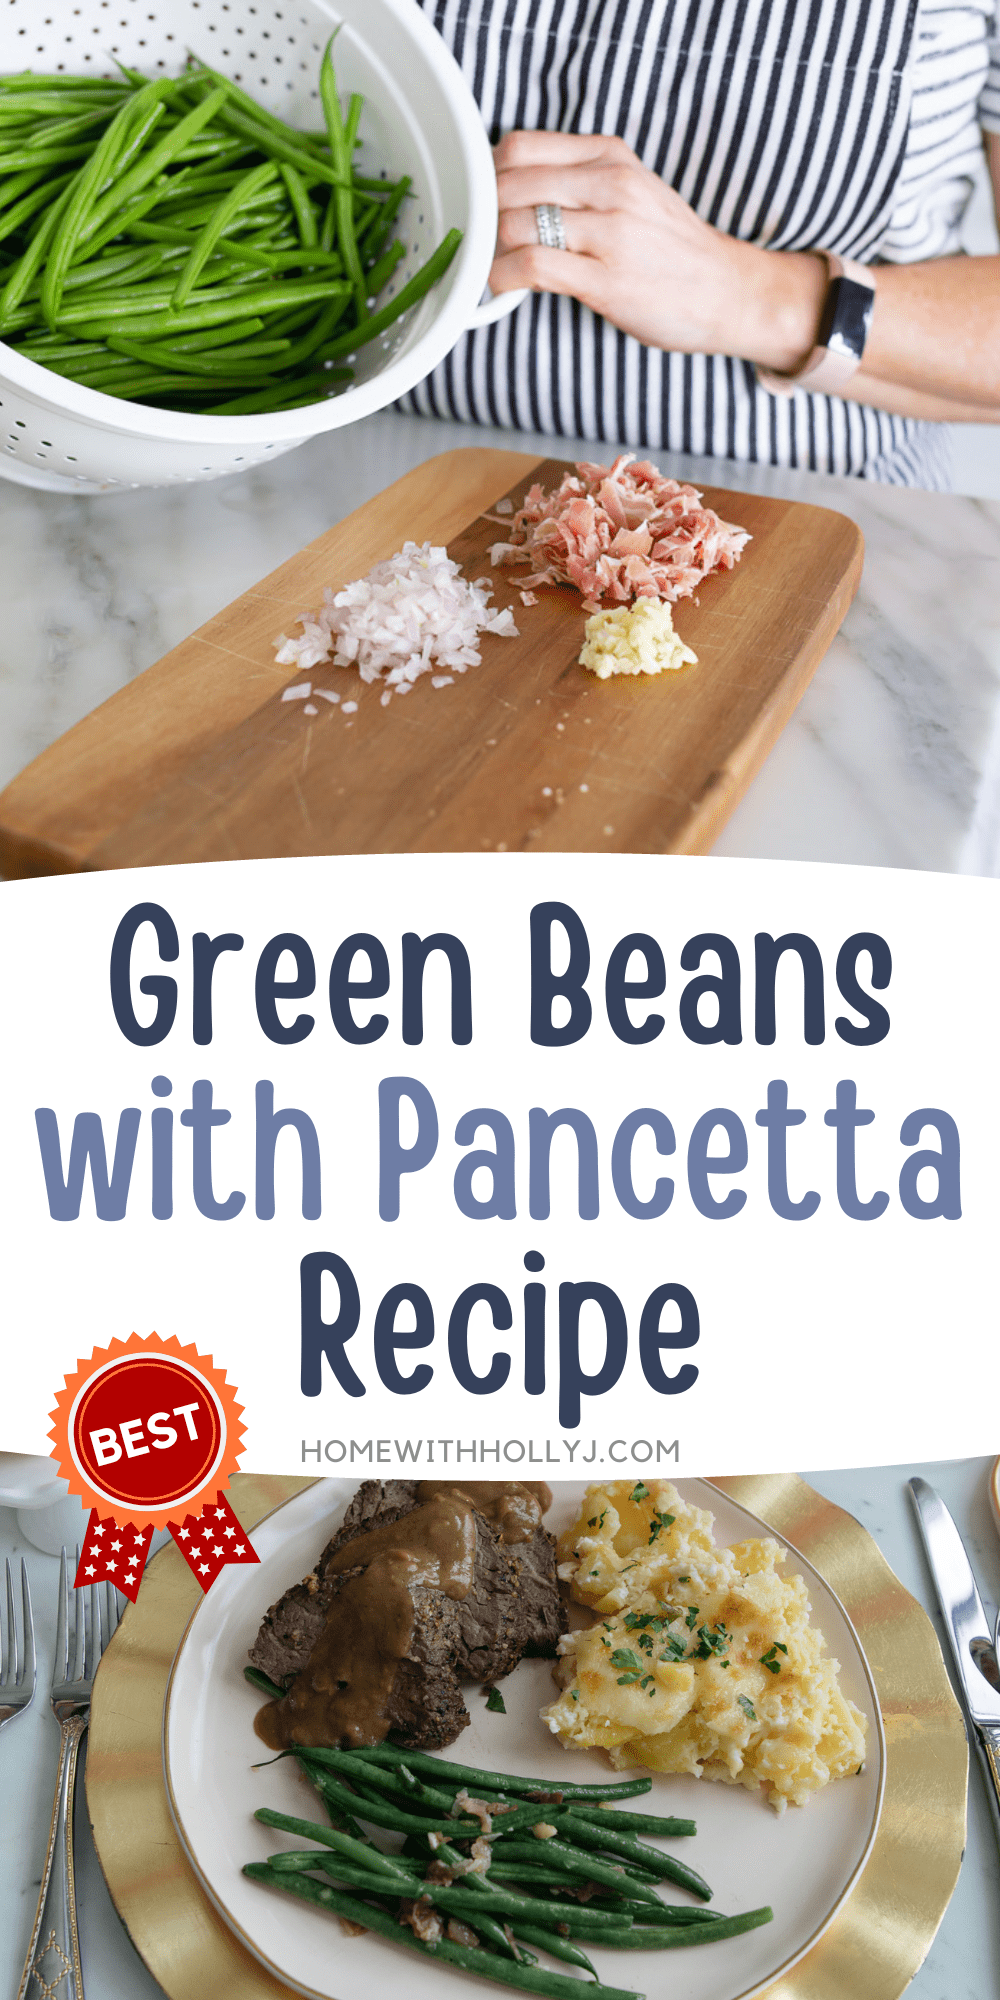 Make a delicious green bean and pancetta recipe in no time! The simple and easy recipe is perfect for a quick and tasty weekday meal.